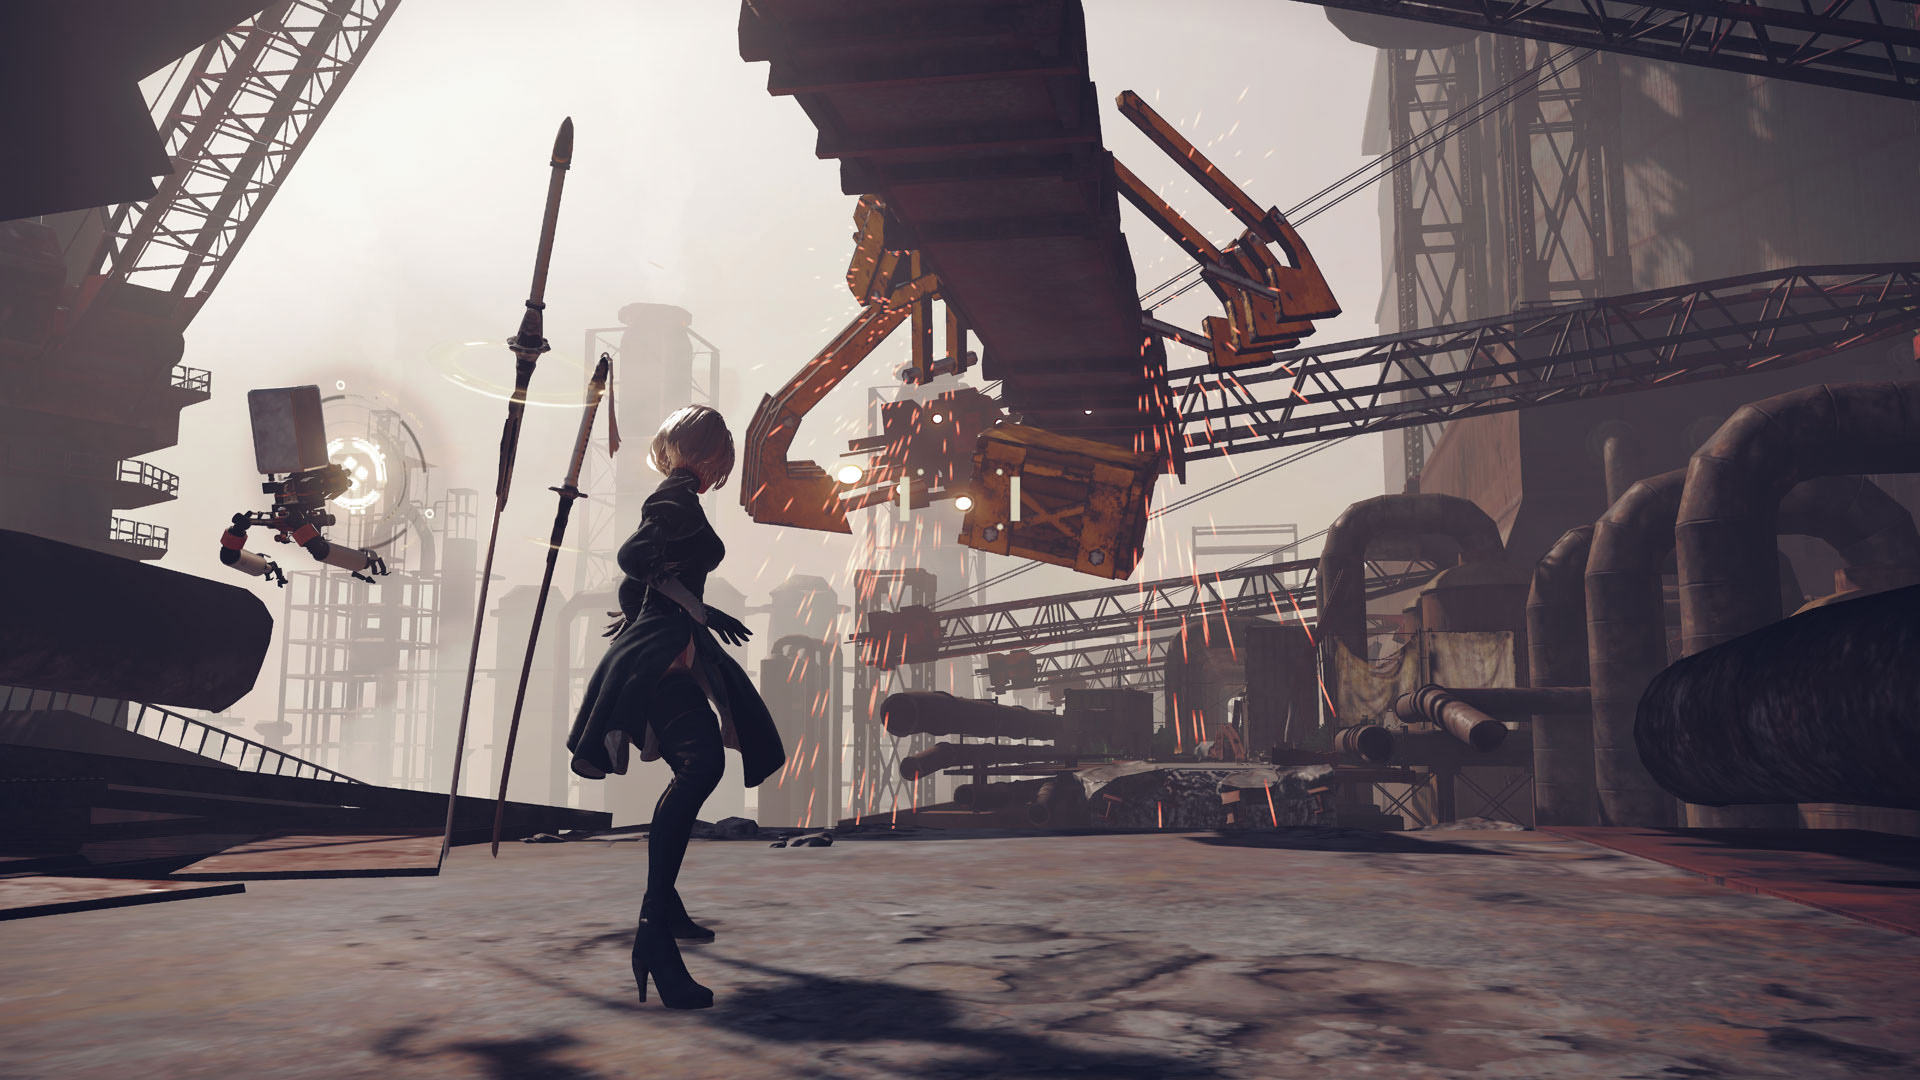 The Nier: Automata PS4 Demo Is Live, And It’s Awesome